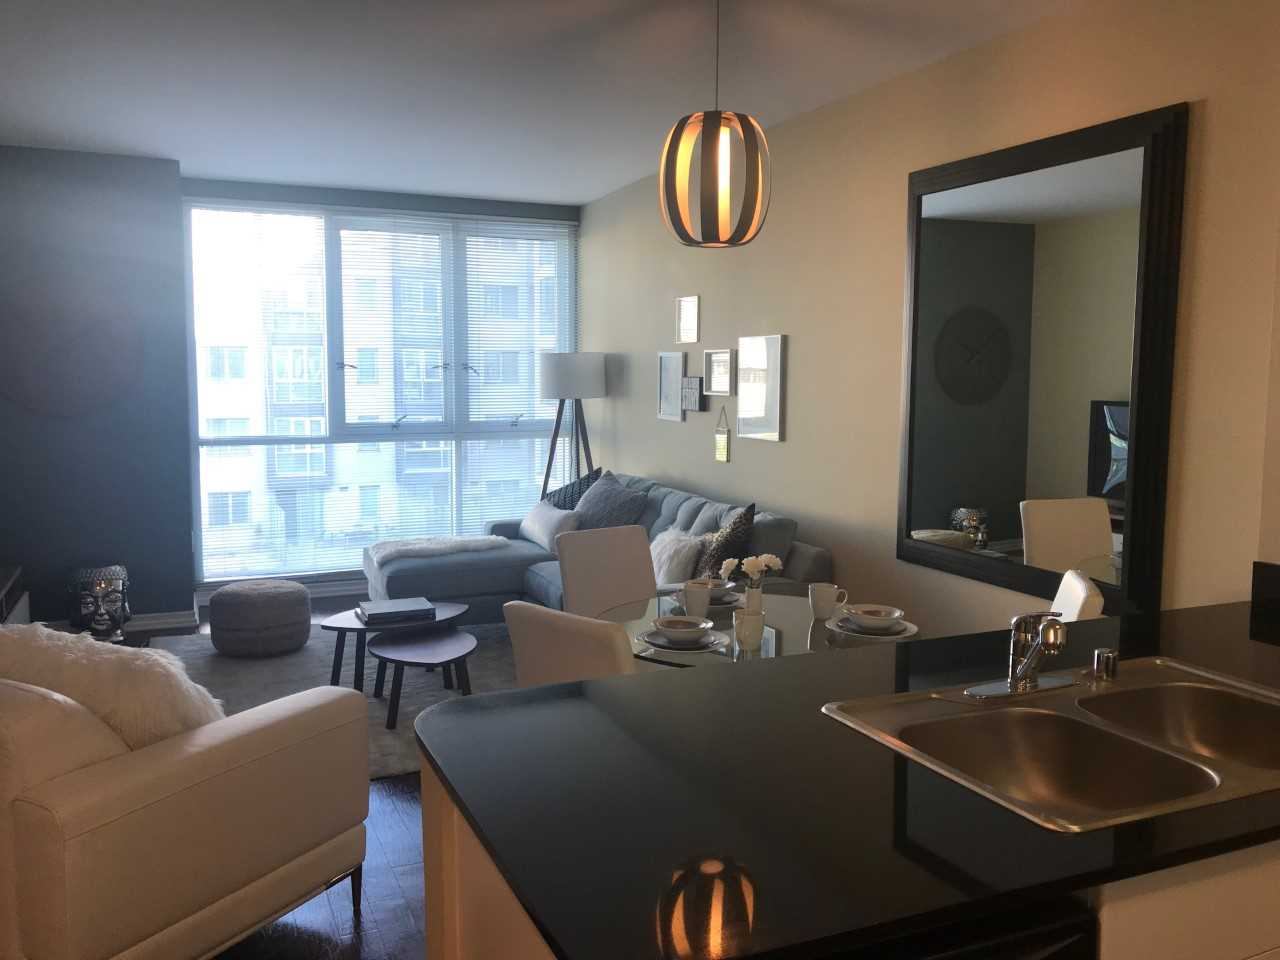 Inside view of a unit's living room. There are couches, coffee table, dining set, and large windows that open multiple ways. Room is adjacent to the kitchen counter with a sink and dishwasher.